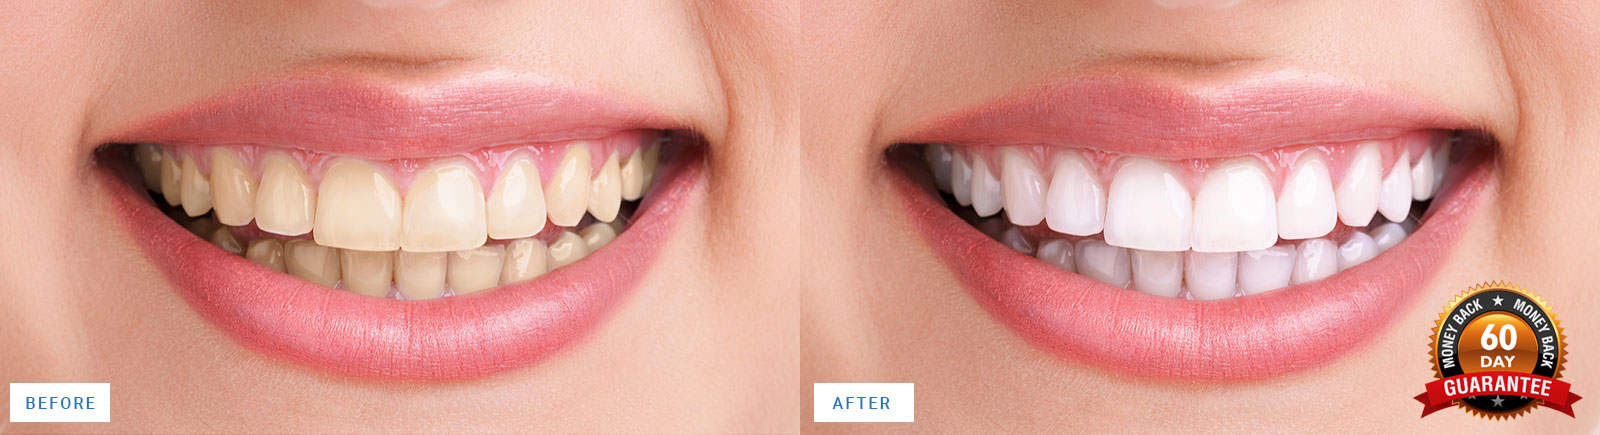 before-after-teeth-whitening-results